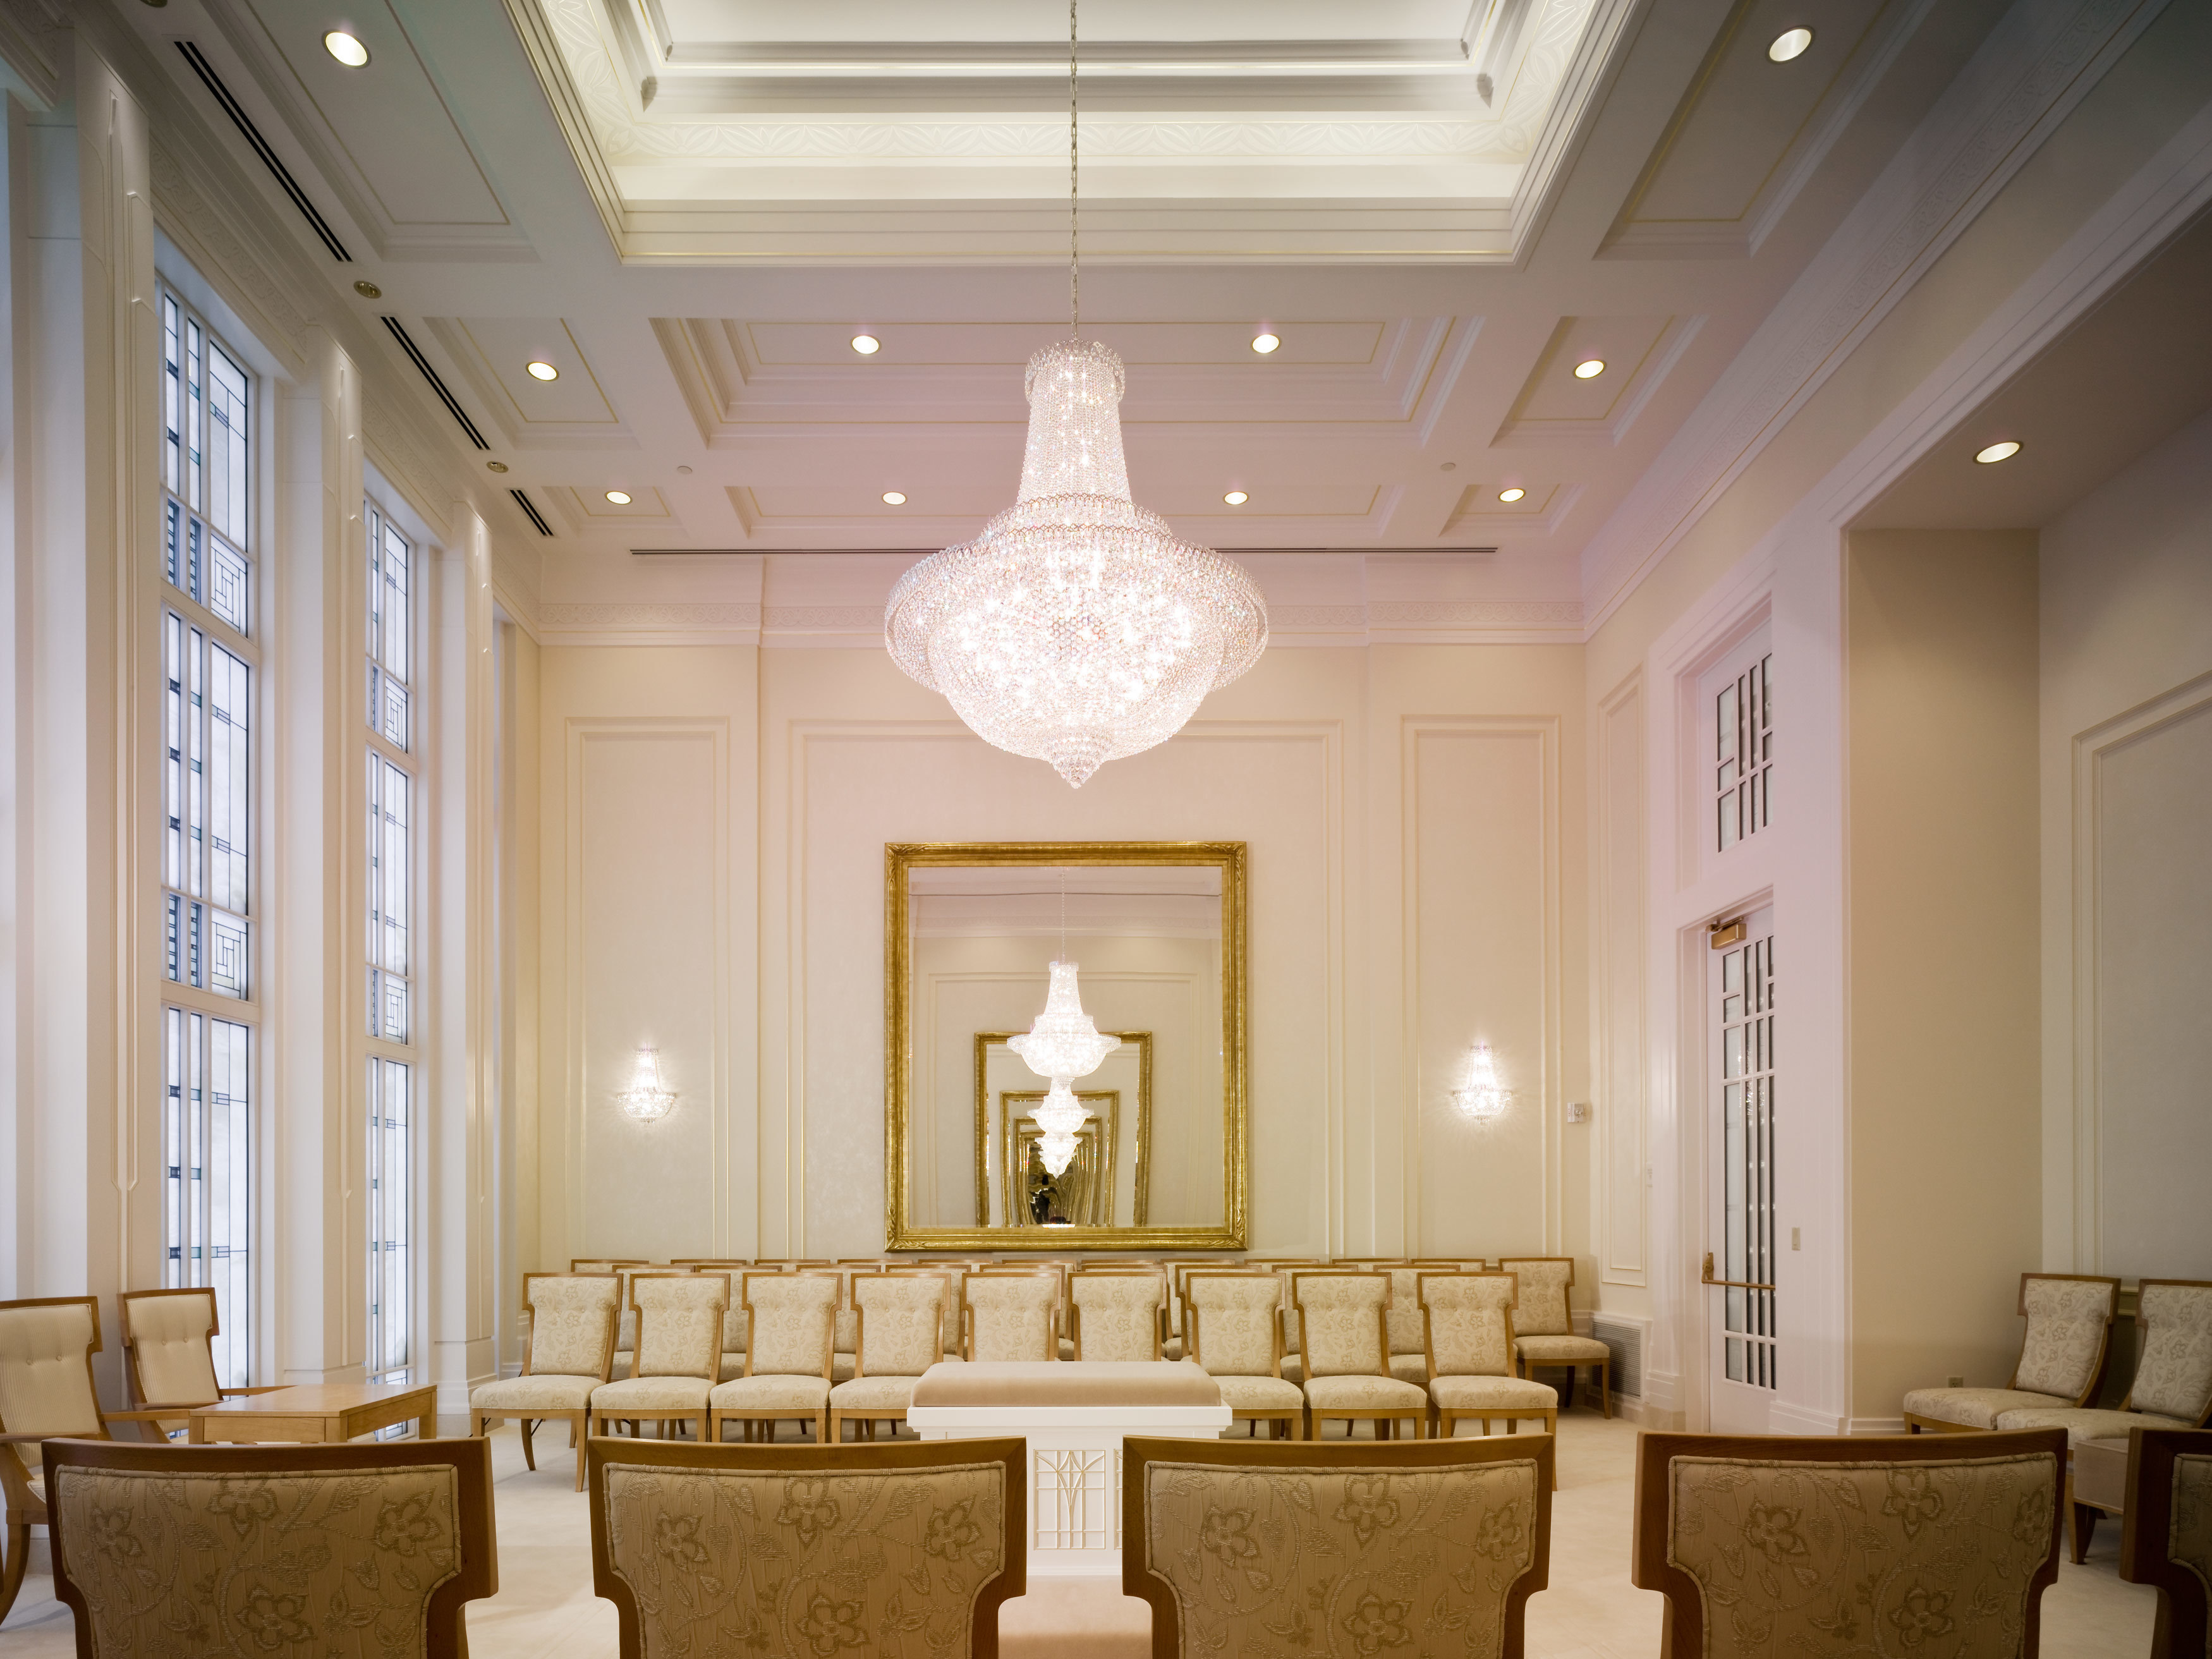 A room with rows of white chairs around an altar, with a white chandelier hanging from the ceiling and two mirrors on opposite walls.